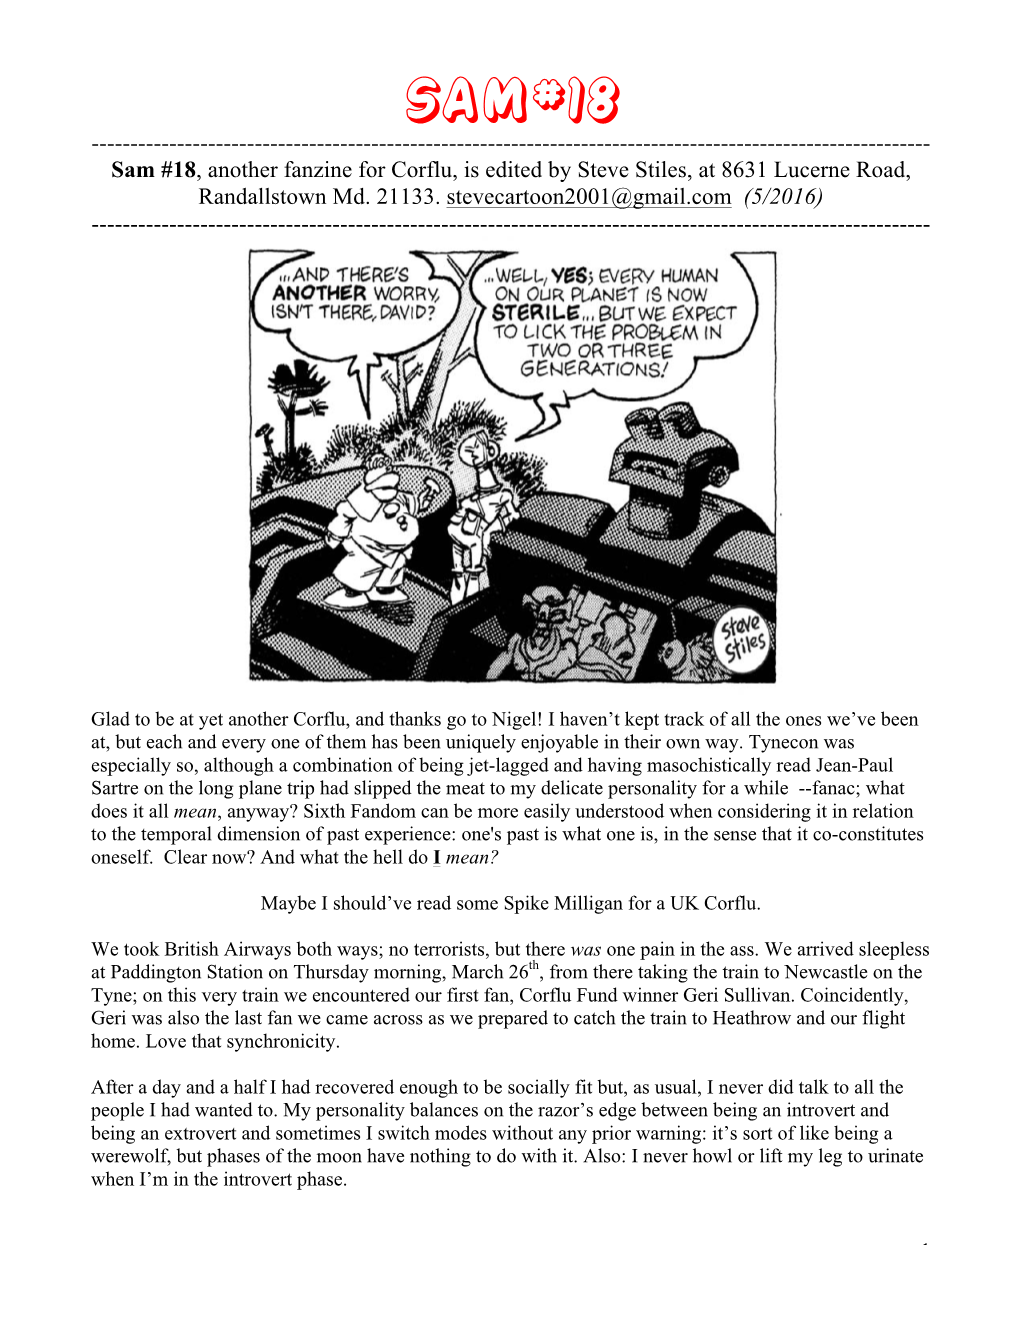 SAM#18 ------Sam #18, Another Fanzine for Corflu, Is Edited by Steve Stiles, at 8631 Lucerne Road, Randallstown Md